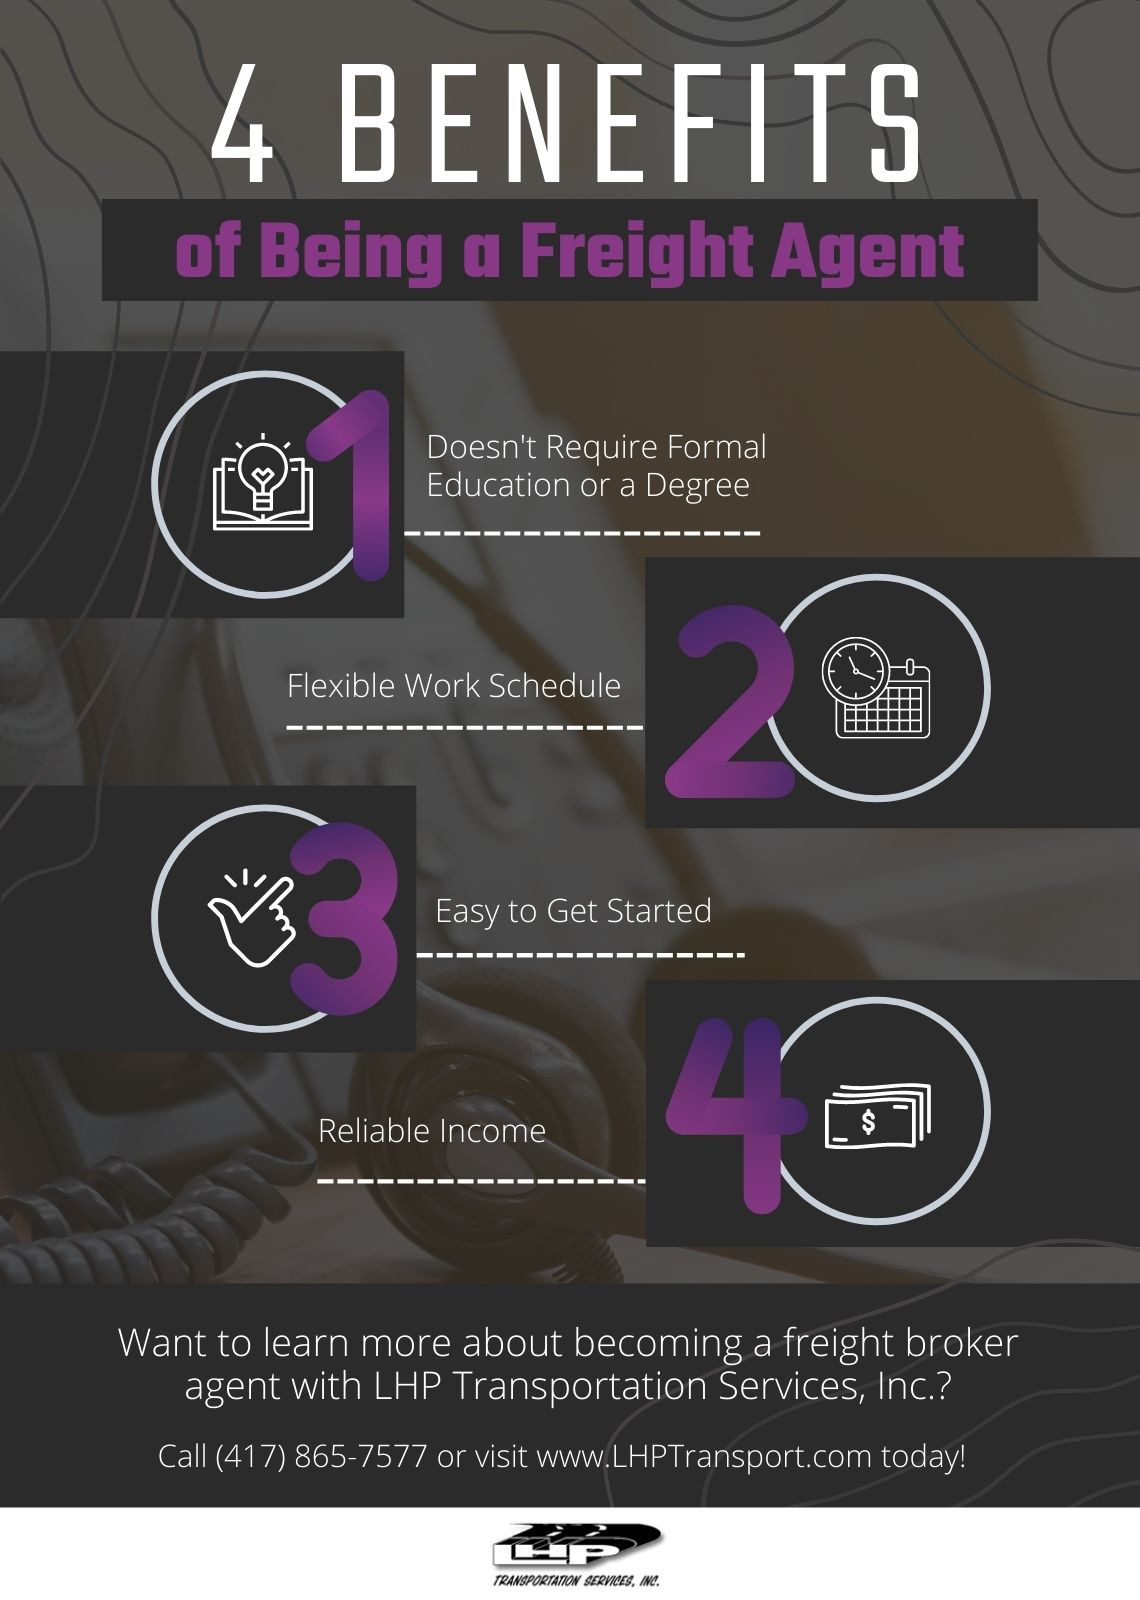 4 Benefits of Being a Freight Agent